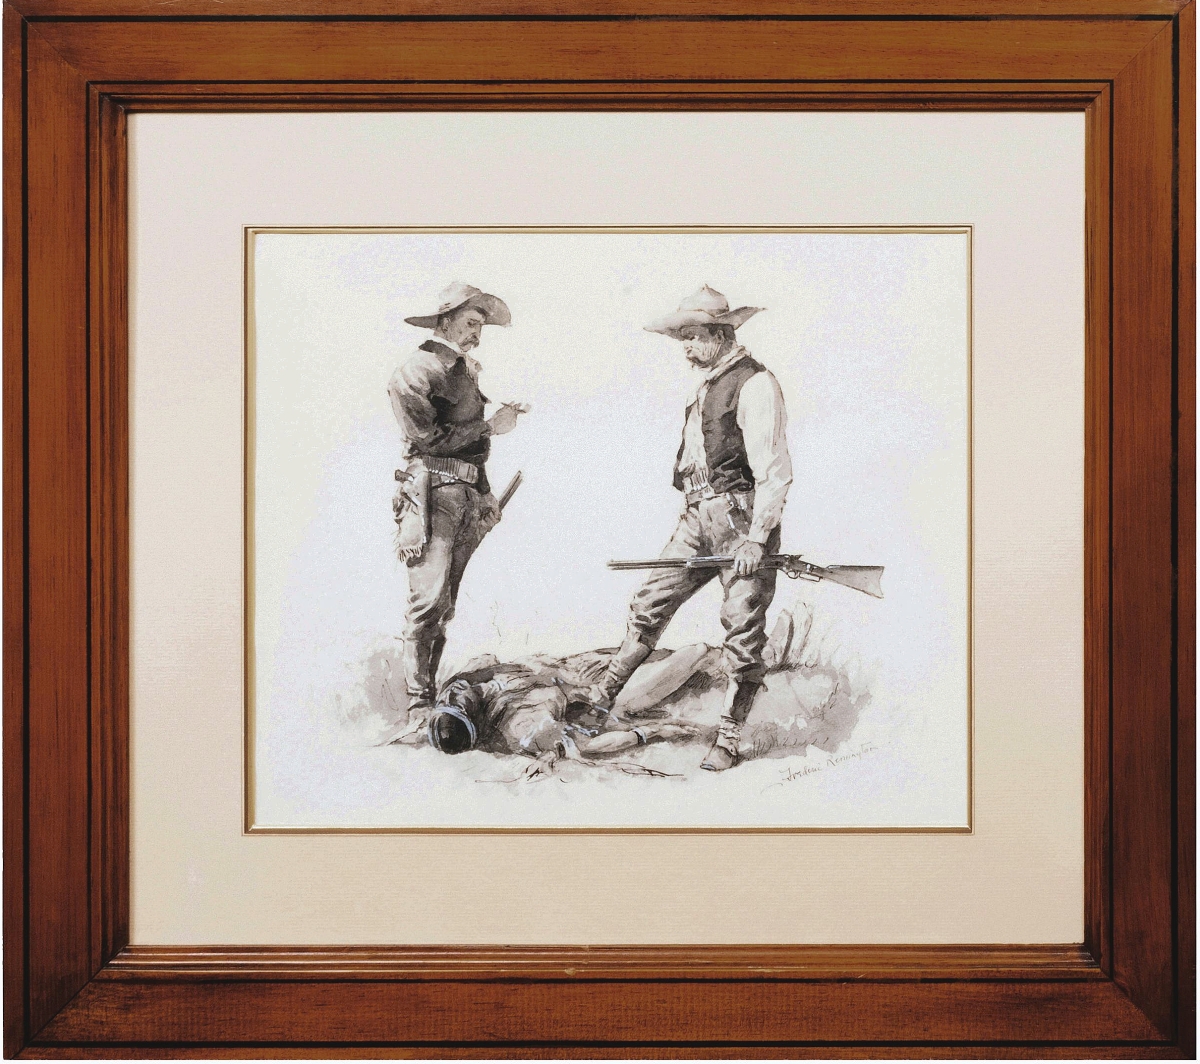 “Searching the Slain” by Frederick Sackrider Remington found favor with a trade buyer, who paid $49,200 for the 1895 ink, wash and gouache on paper picture ($15/20,000).